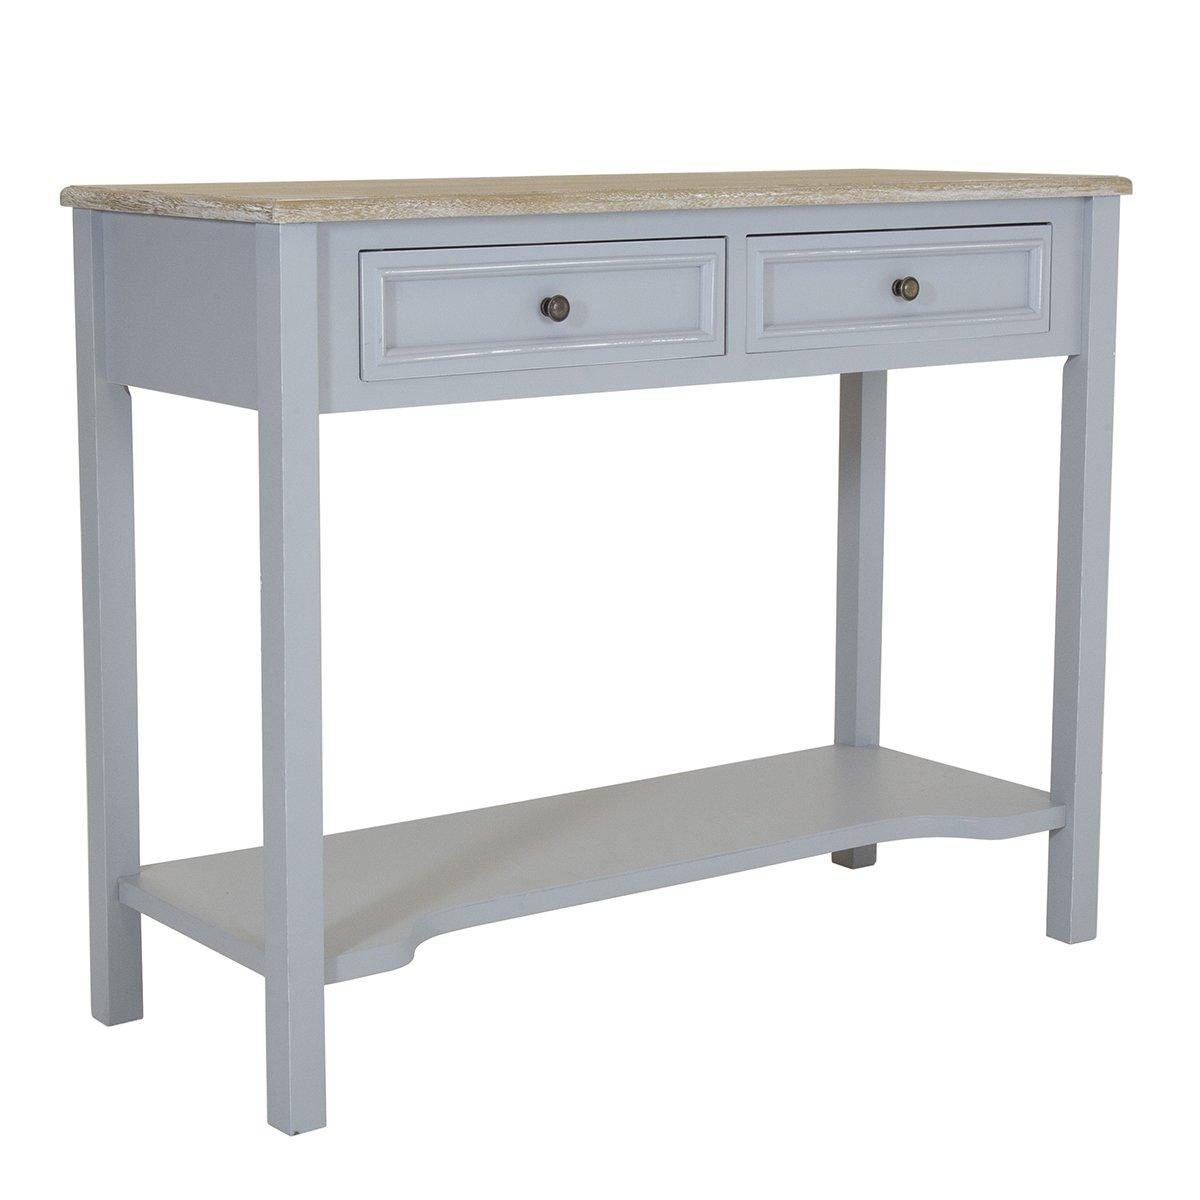 Loxley 2 Drawer Wooden Storage Console Hallway Table Grey